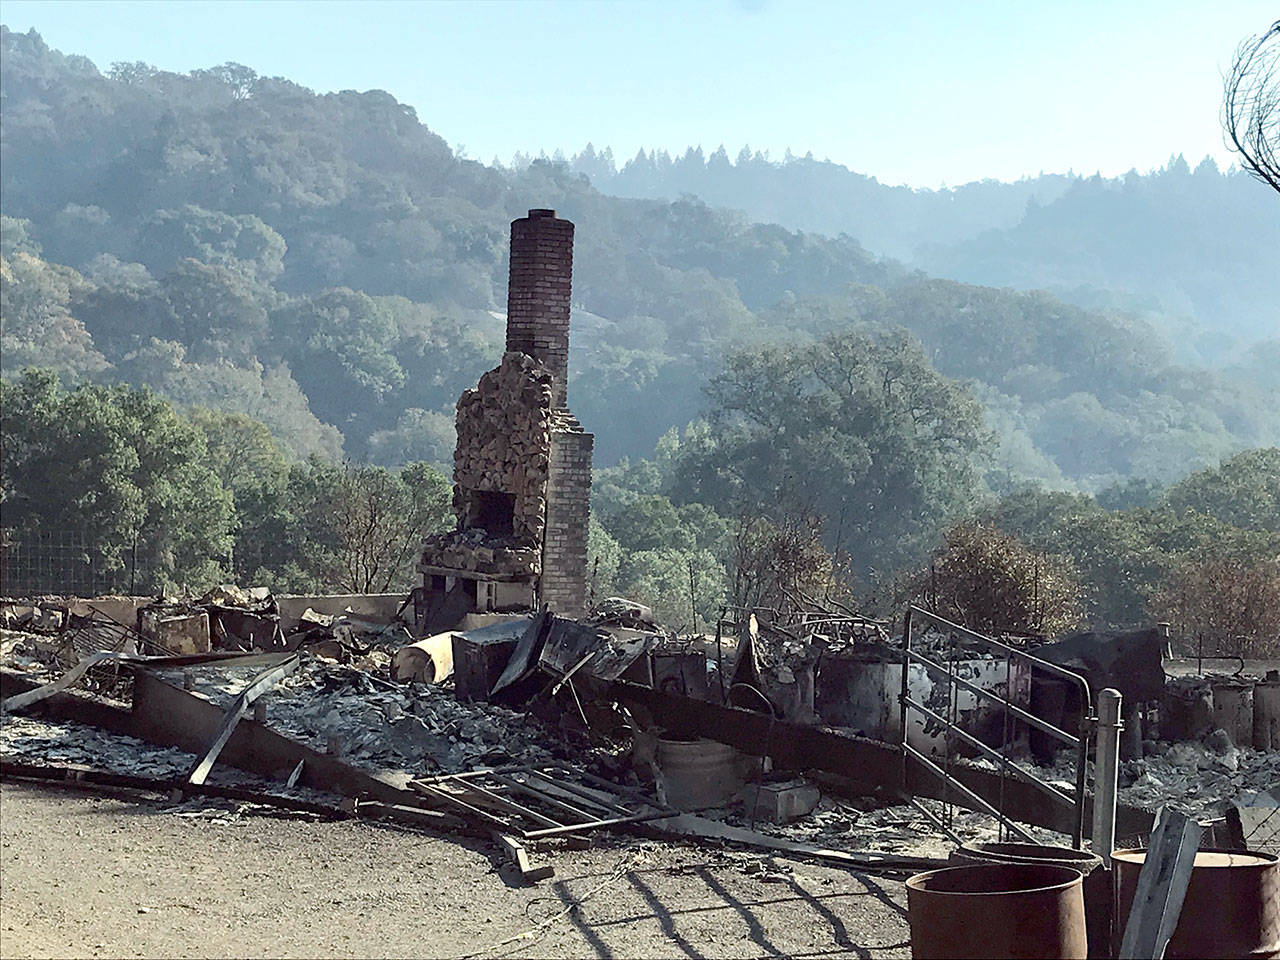 East Jefferson County firefighters are helping to mop up the Kincade Fire as in this photo of the charred shell of a home near Kellogg, Calif., in Sonoma County.